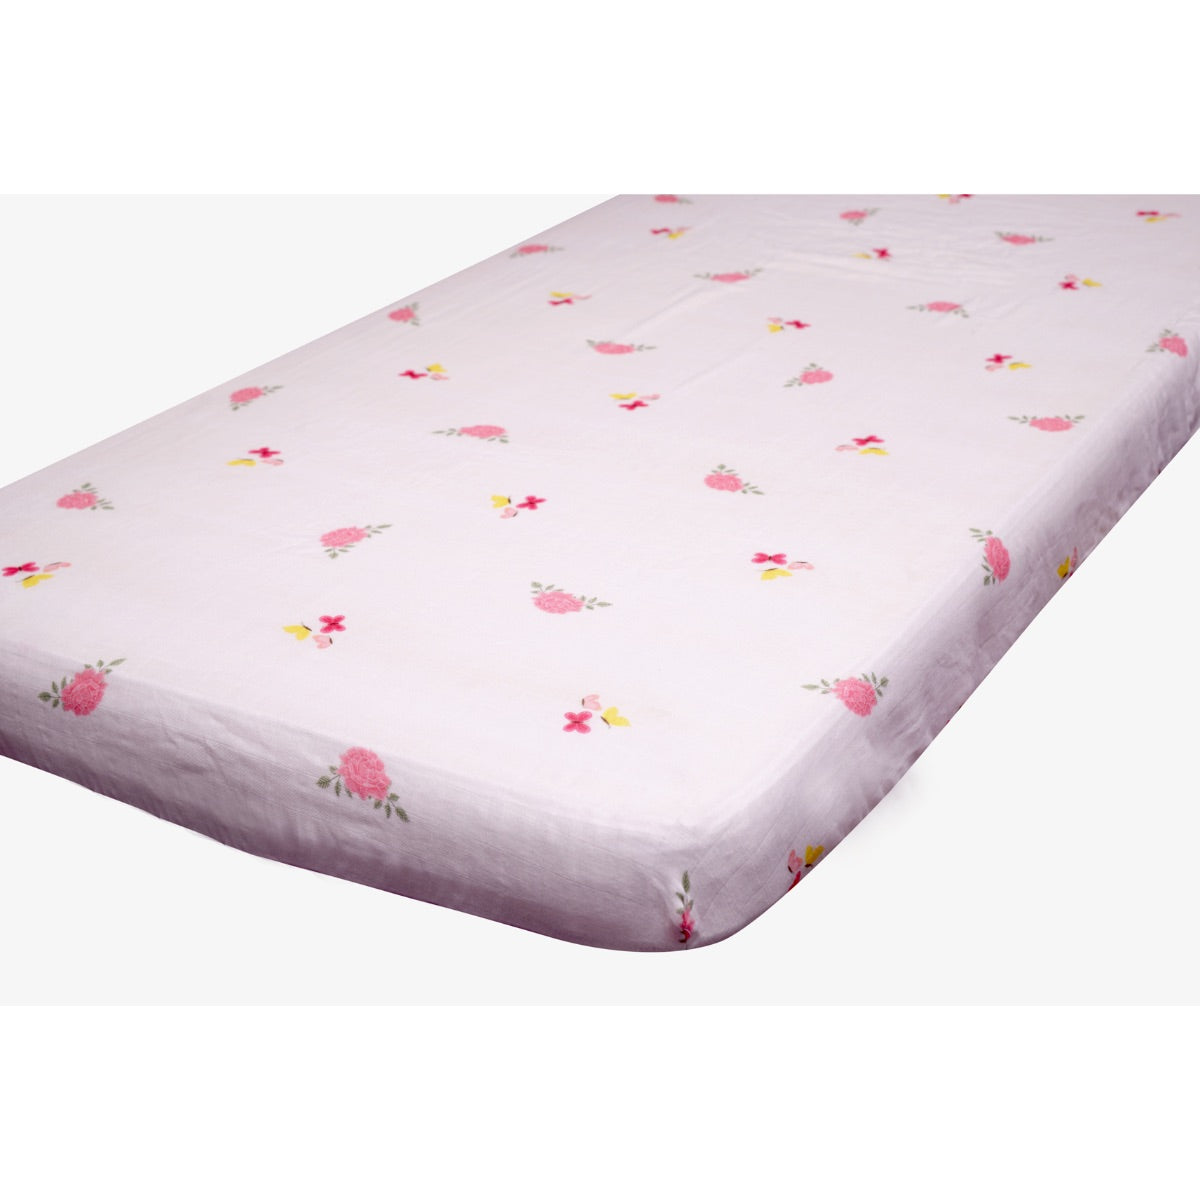 Little By Little Floral & Flutter Baby Cot Fitted Sheet, White